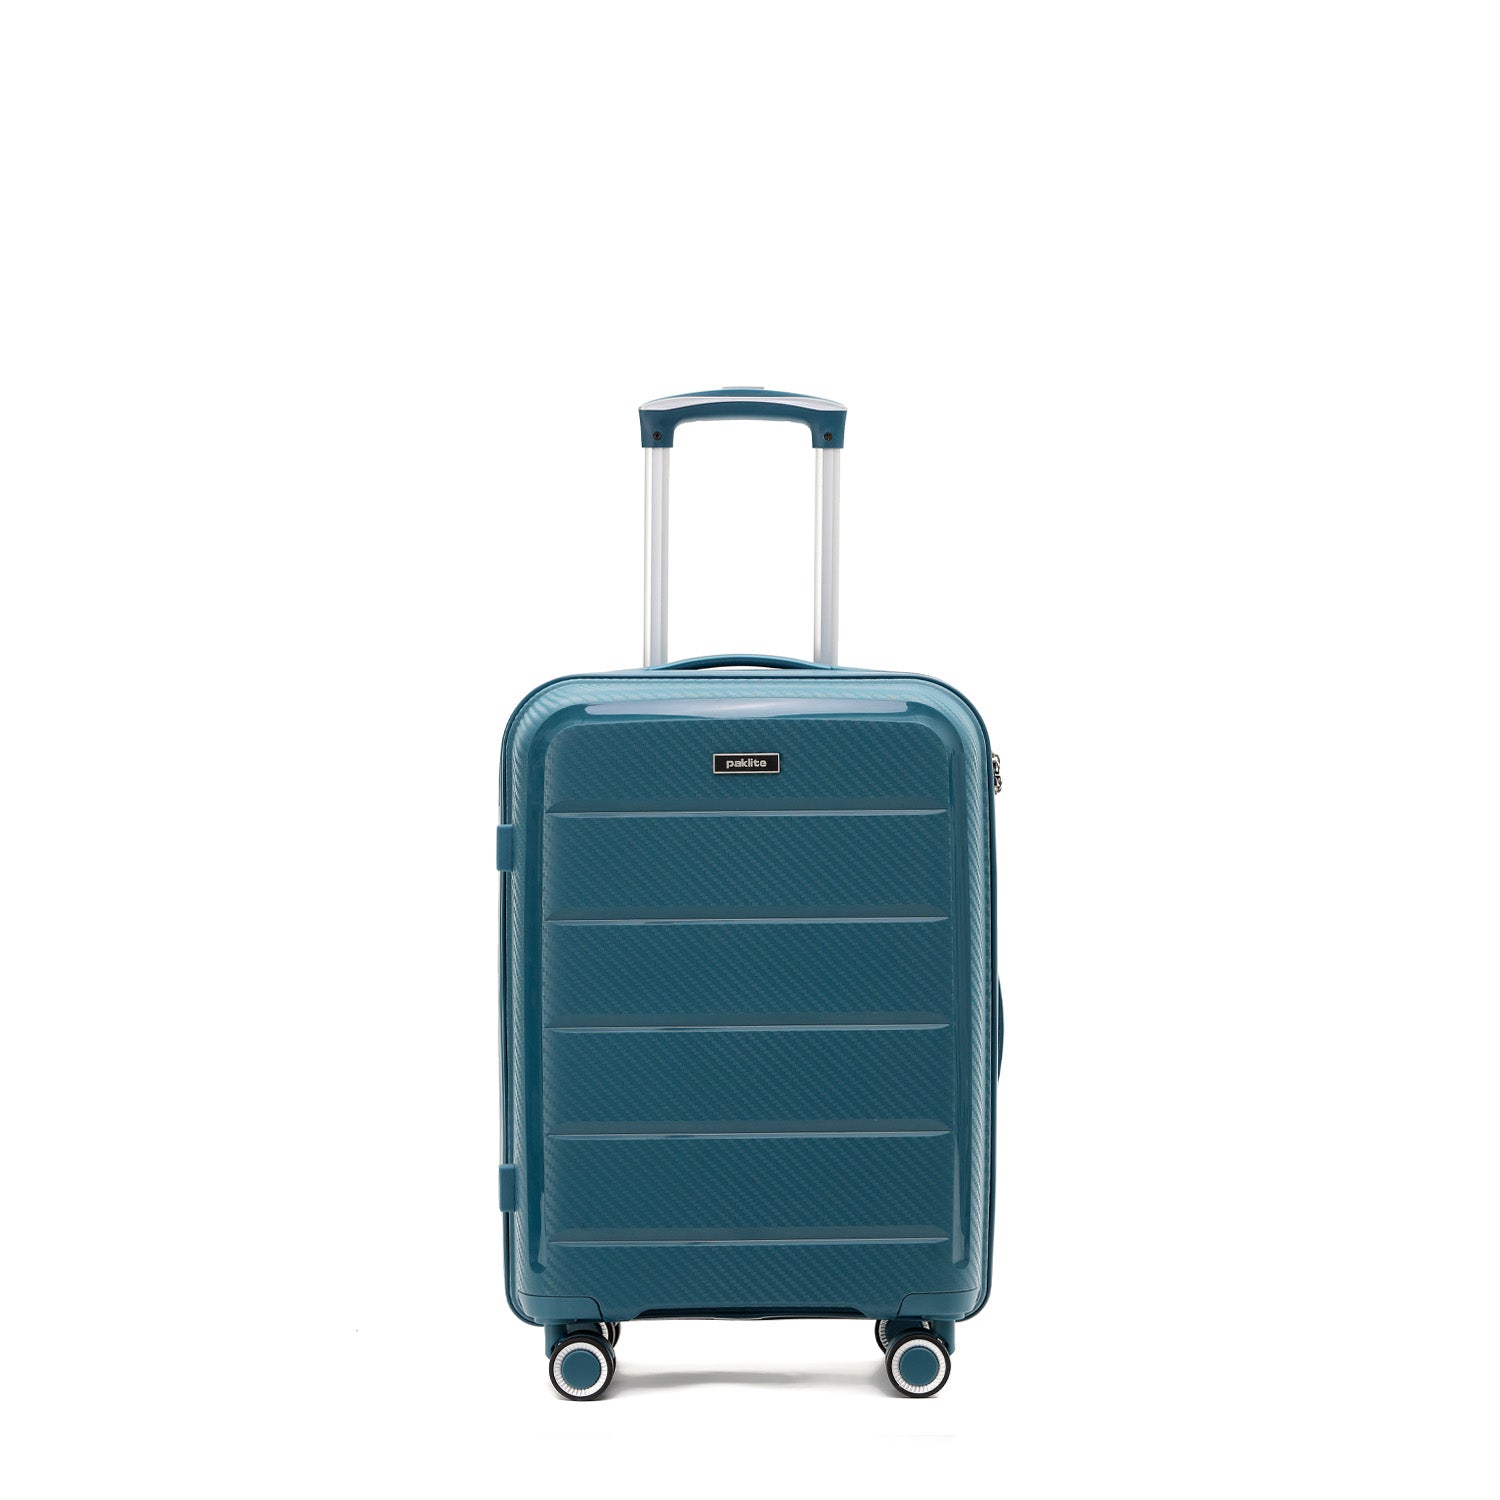 Paklite - PA7350 small spinner suitcase - Blue-1